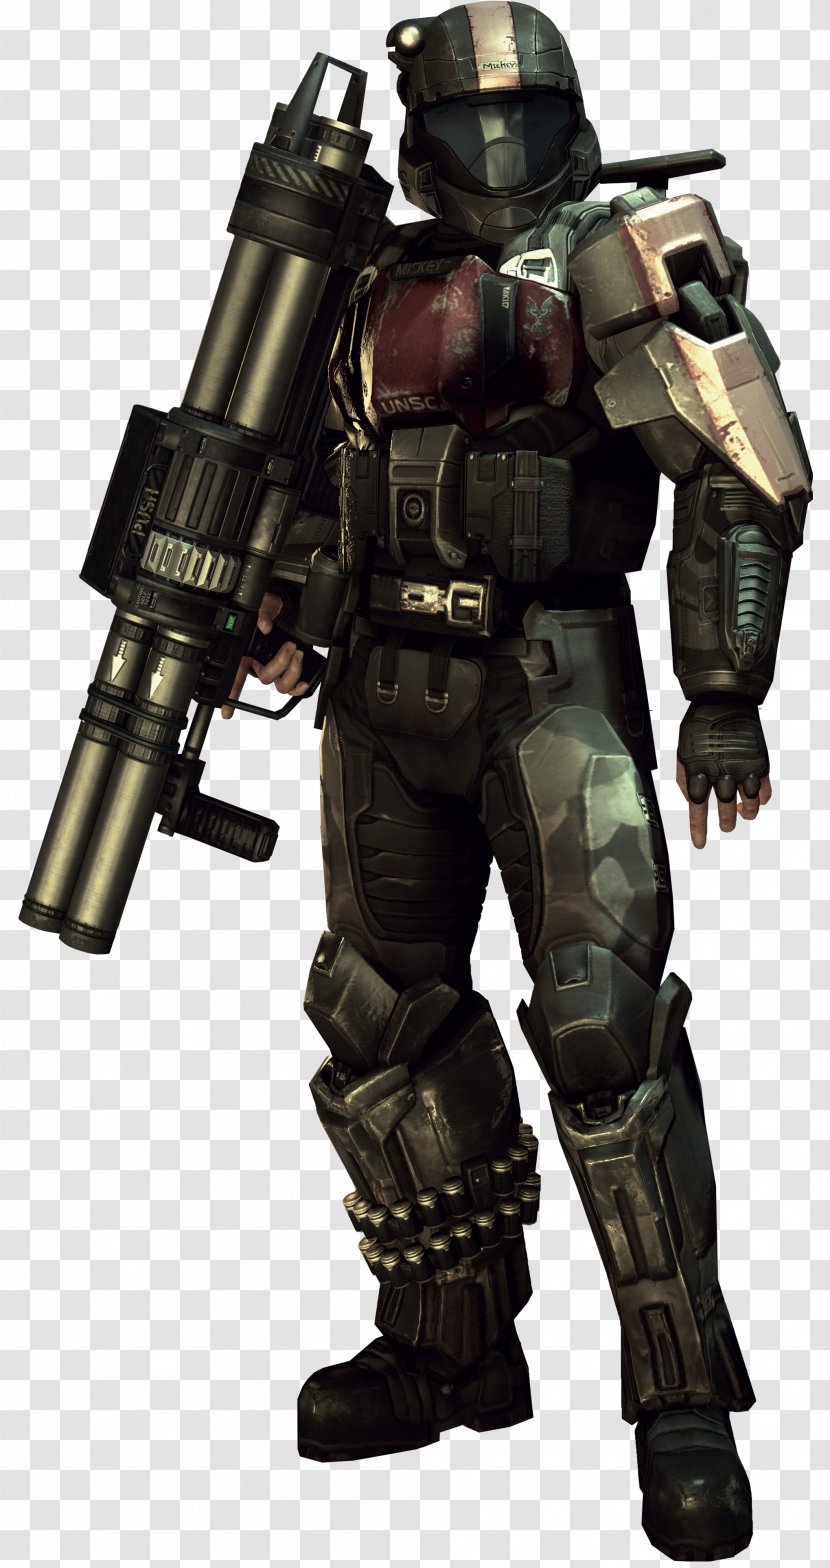 Halo 3: ODST Halo: Reach Master Chief 4 - 3 Odst Transparent PNG